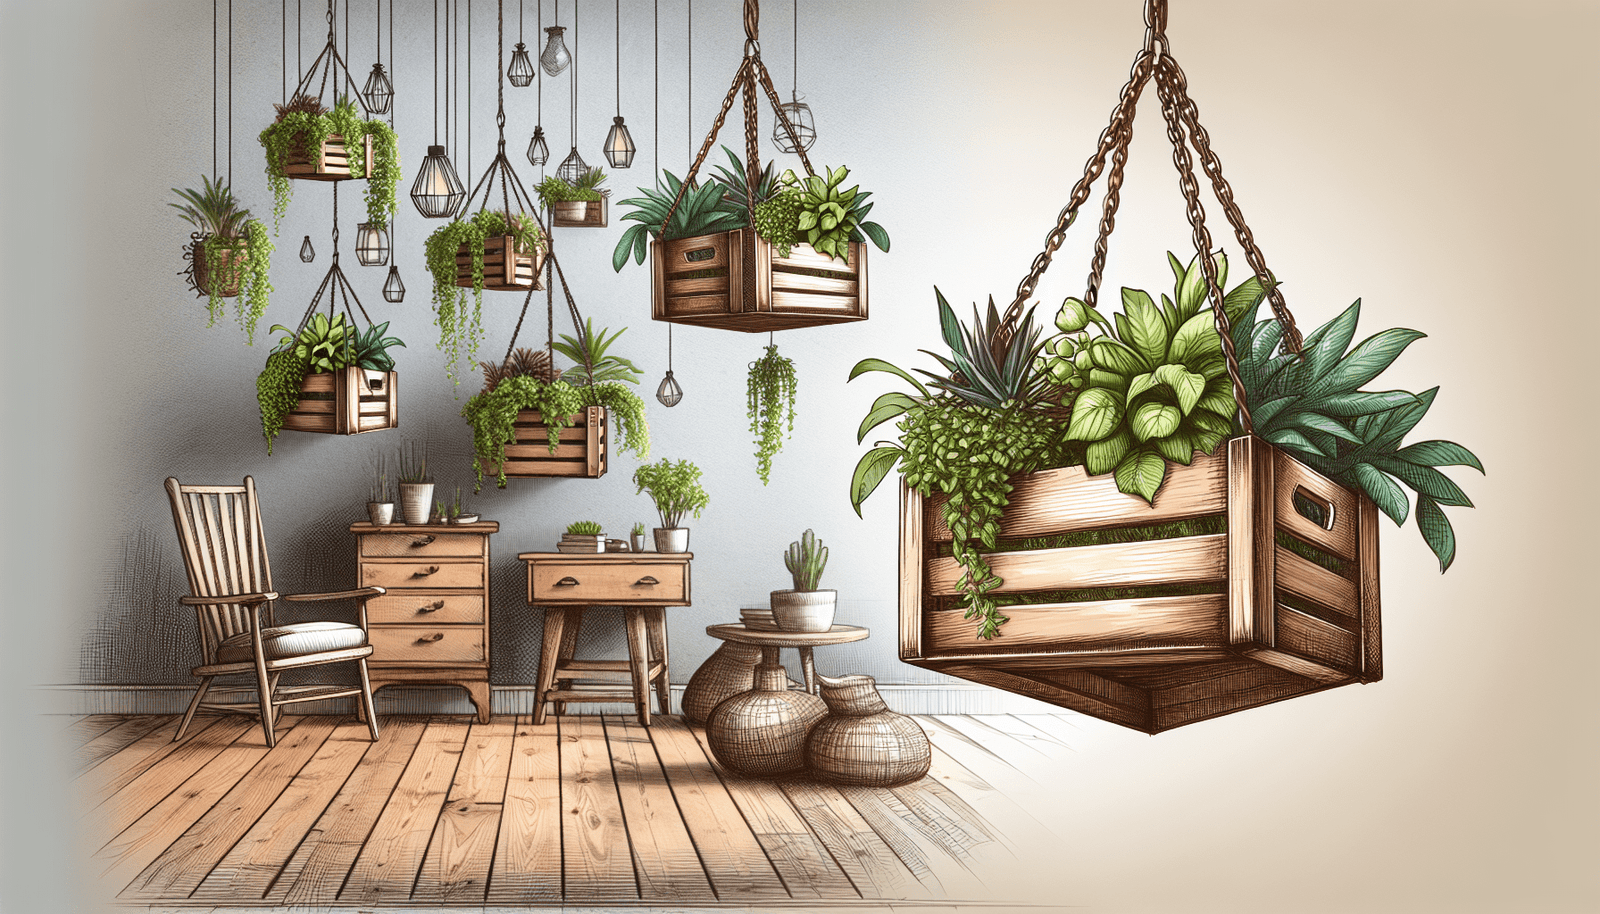 DIY Hanging Crate Planters Ideas